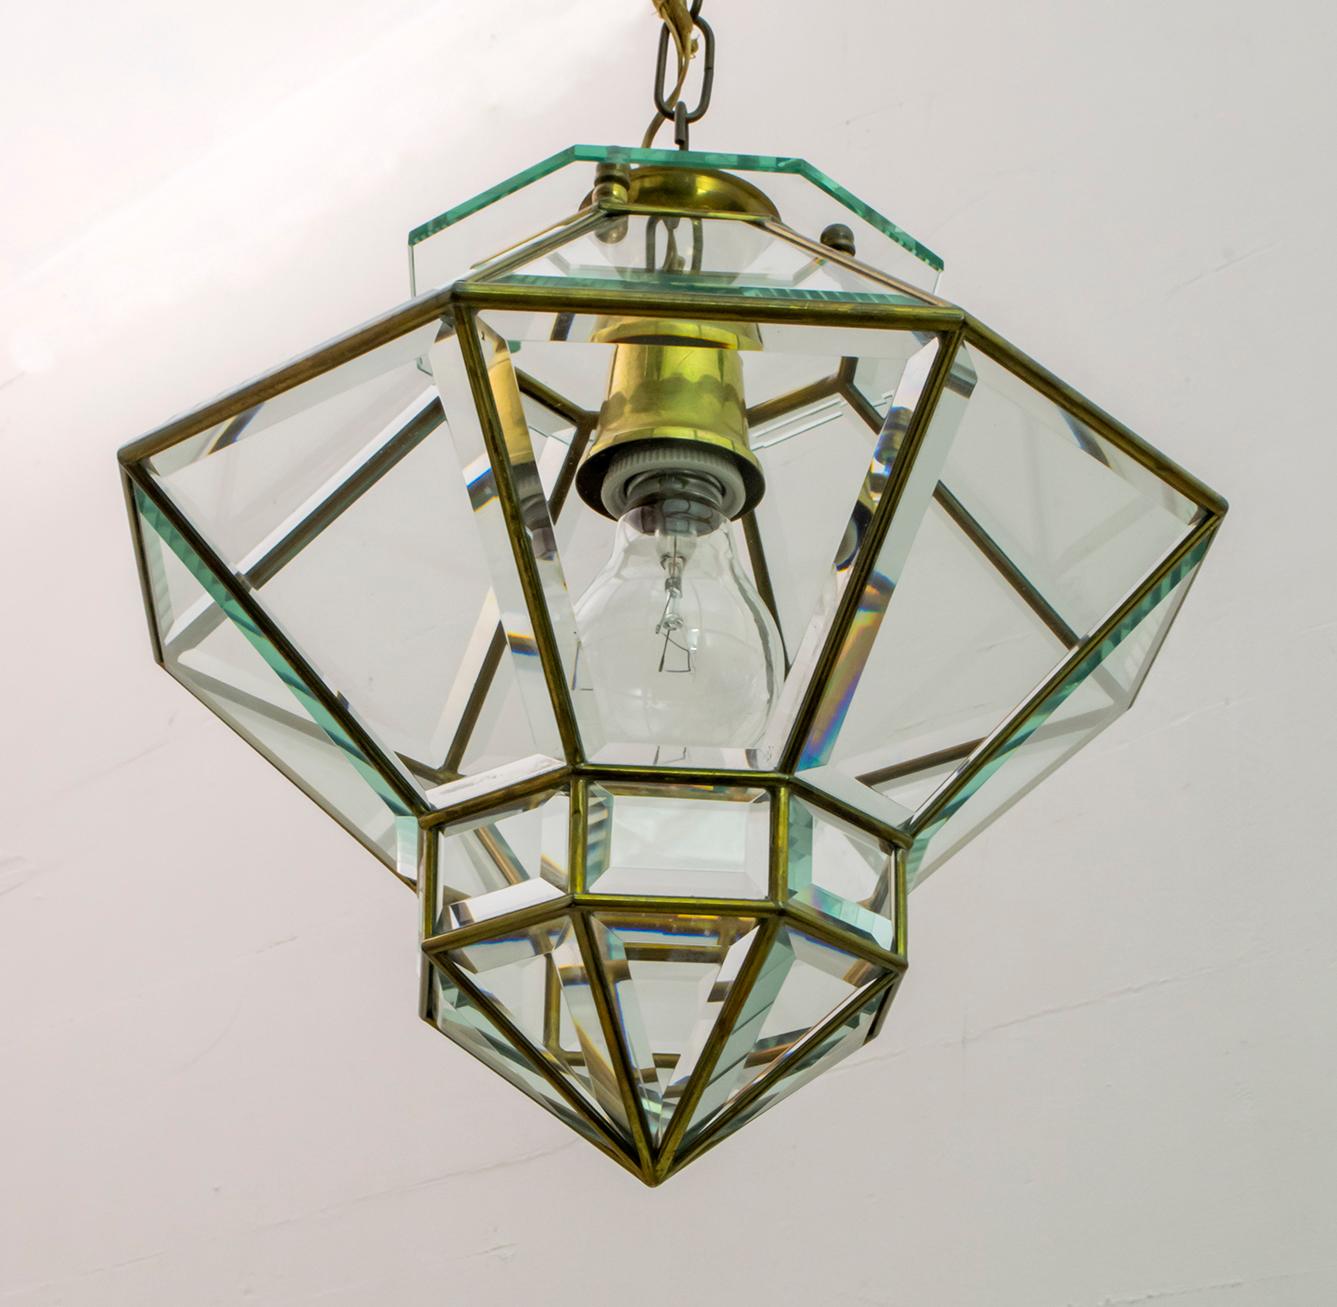 Early 20th Century Adolf Loos Art Nouveau Brass and Beveled Glass Pendant Light for Knize, 1905